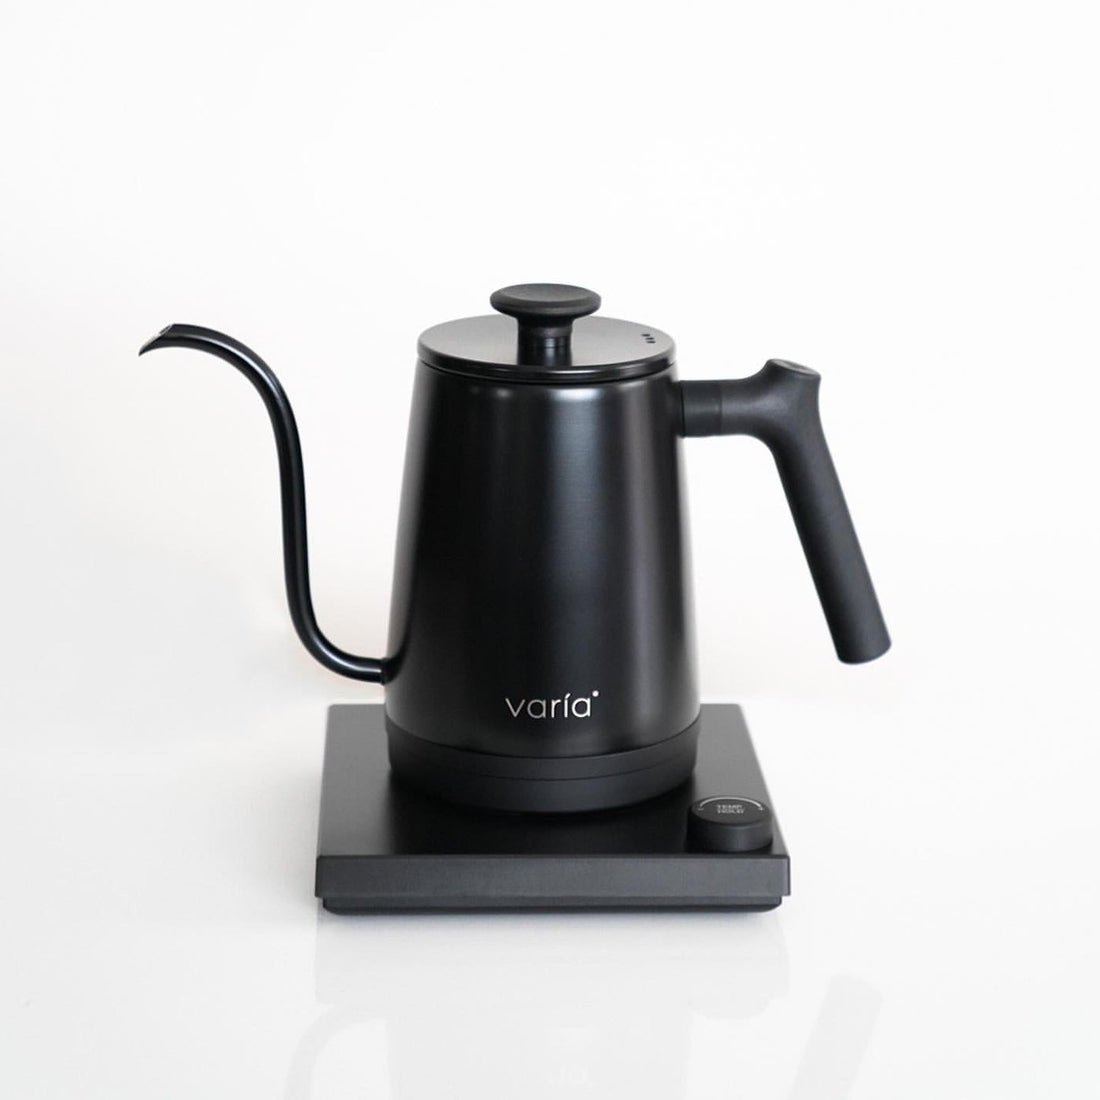 Varia Multi Brewer Coffee Maker Review - Pull & Pour